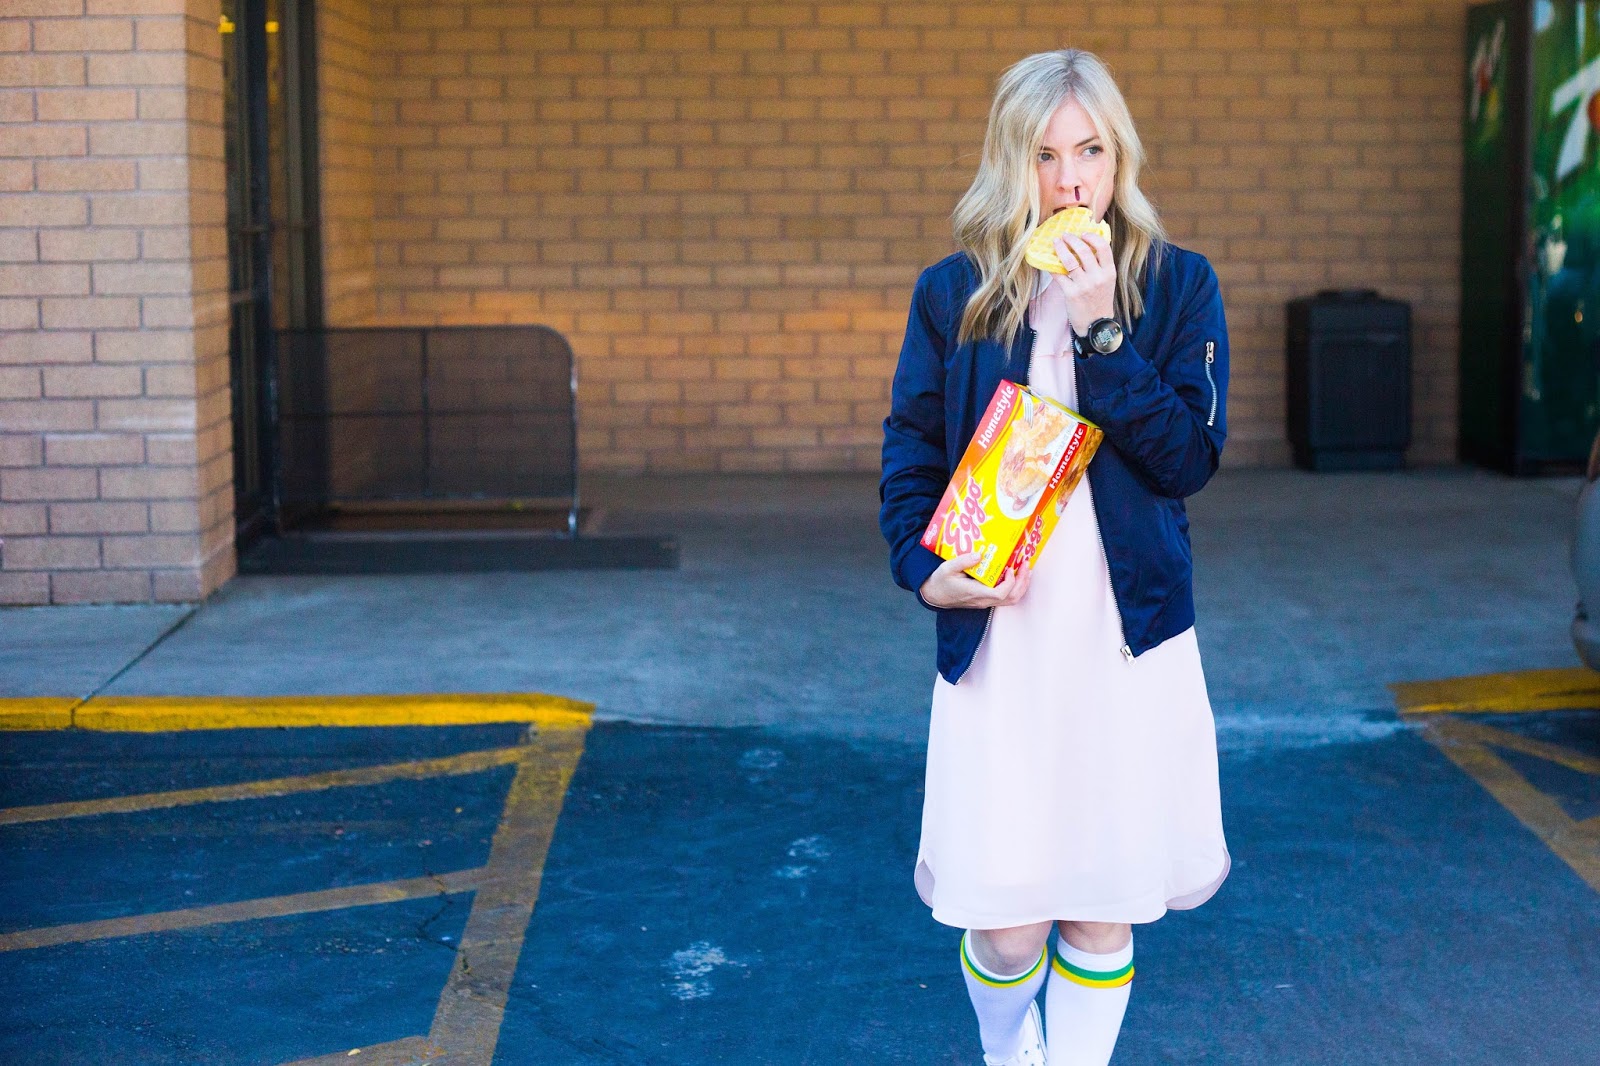 do it yourself divas: DIY Eleven Costume From Stranger Things